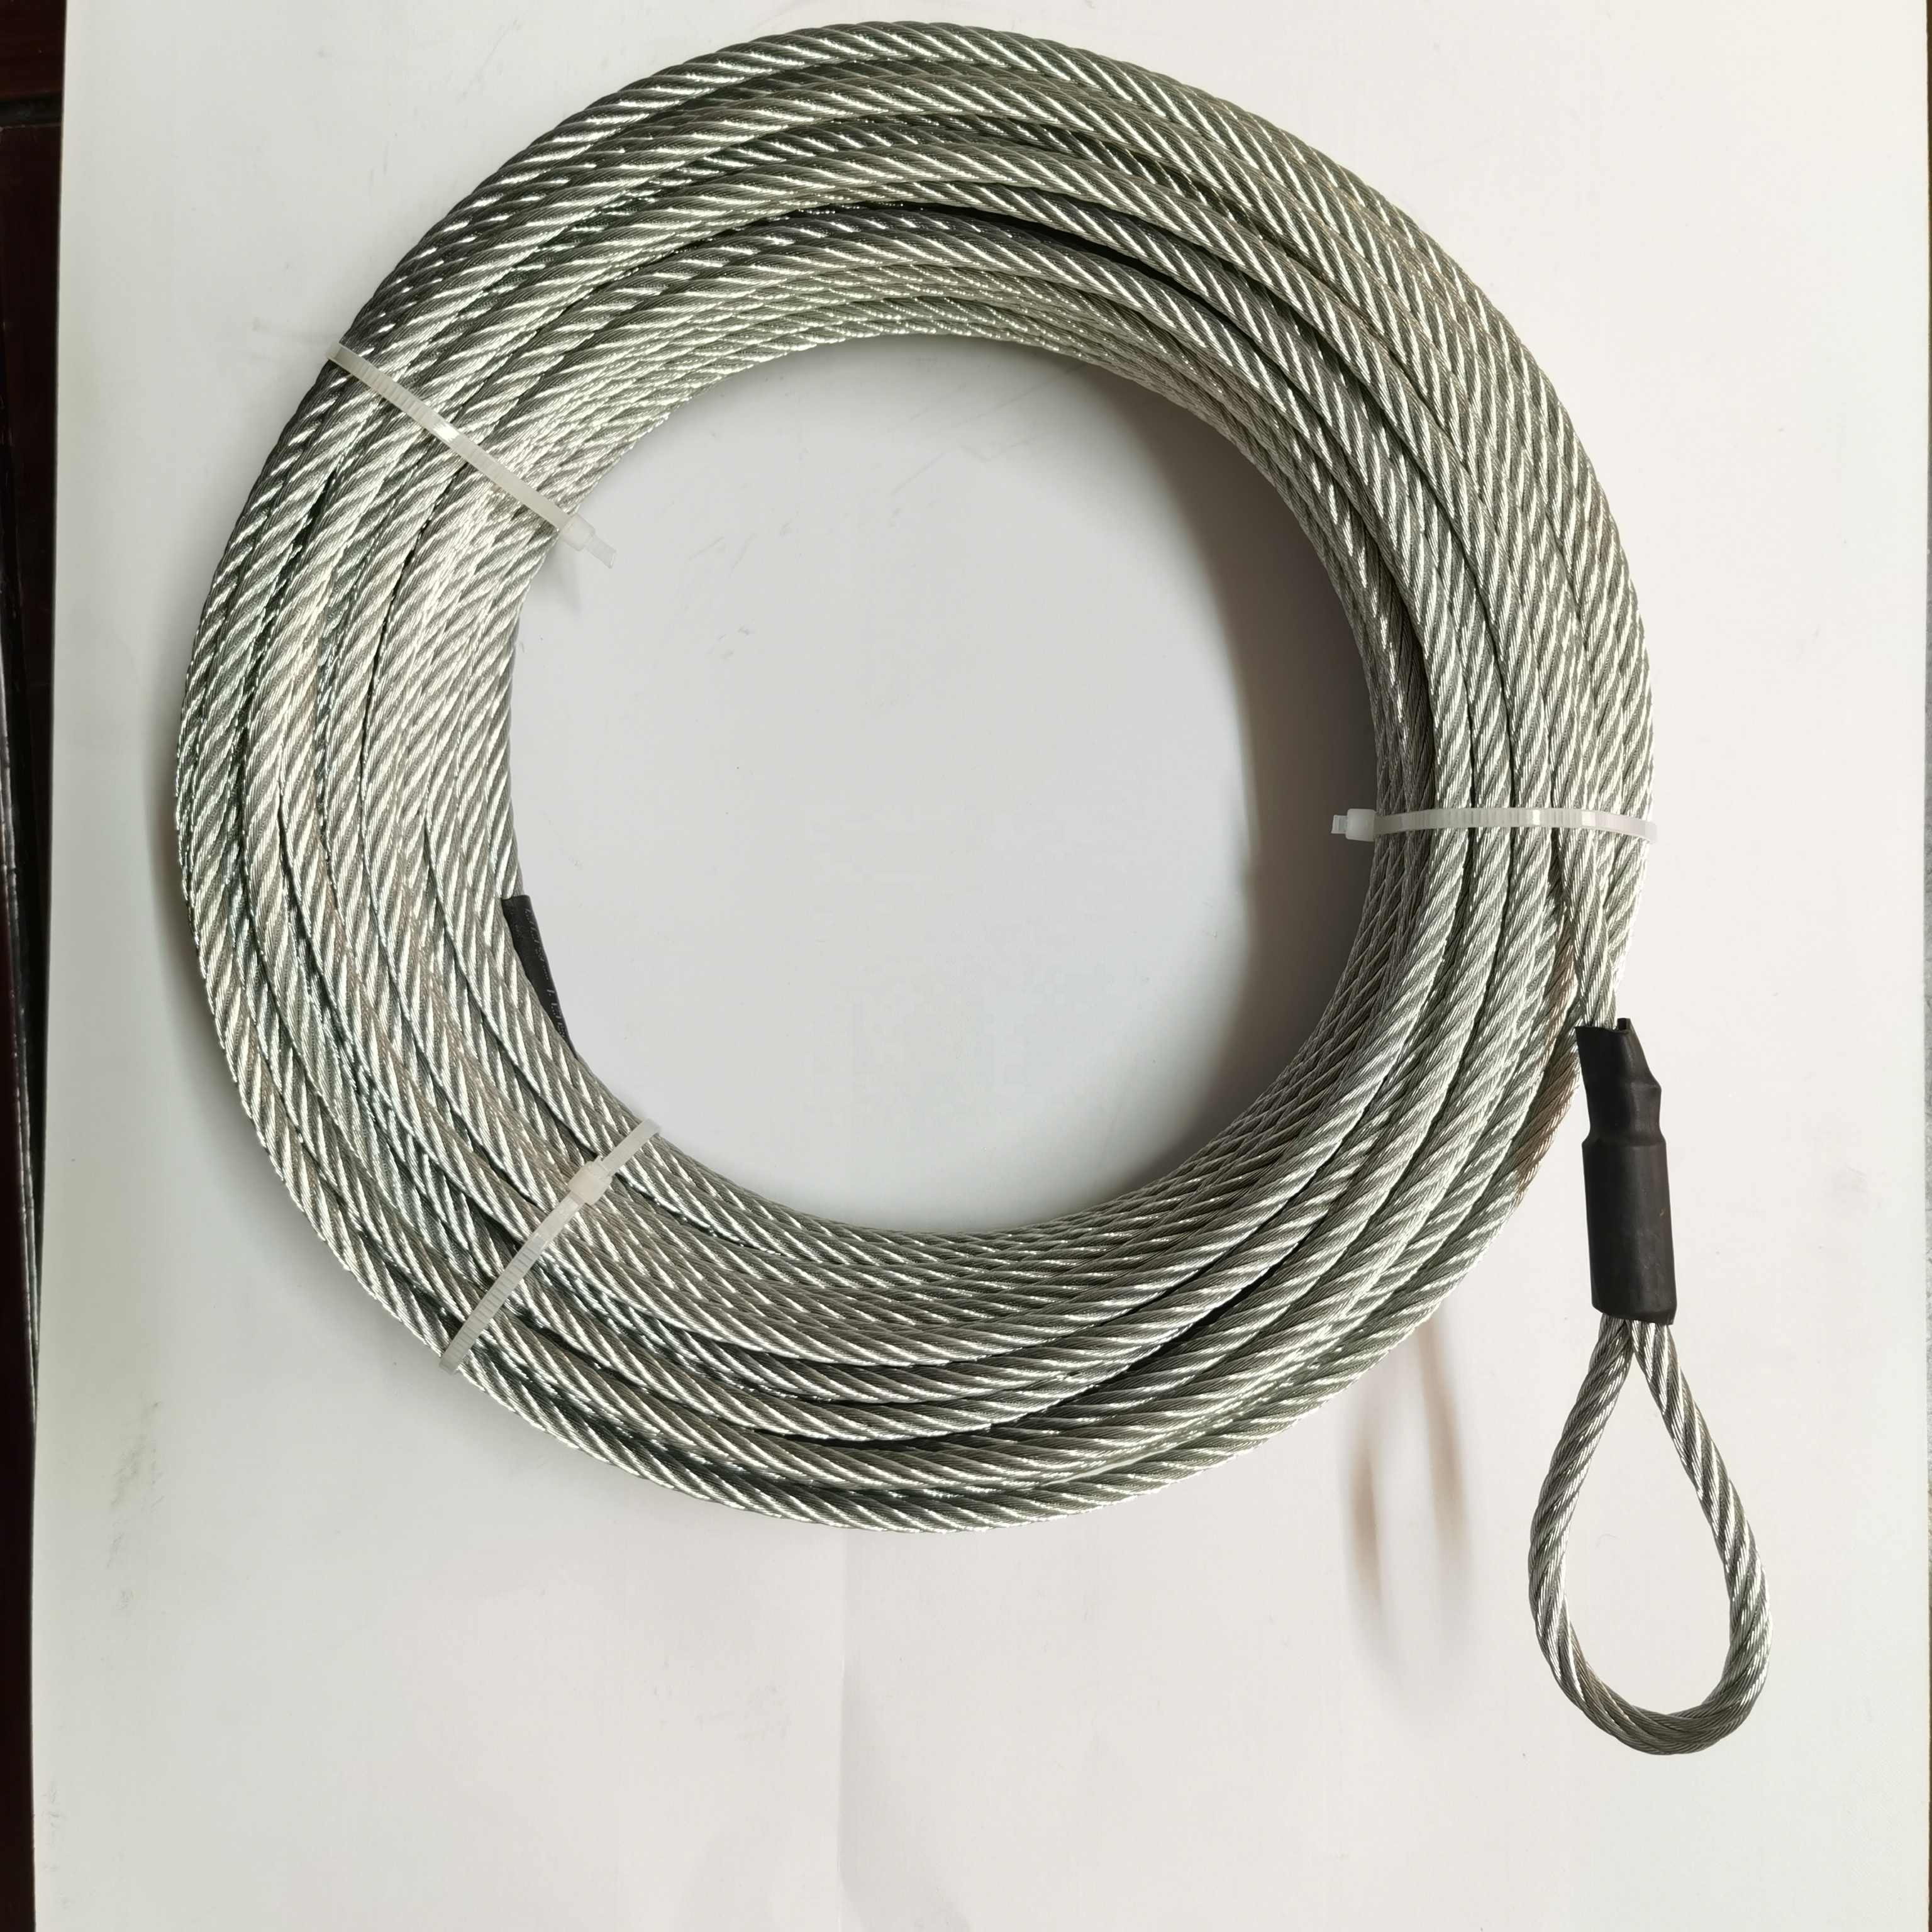 4mm 5mm 6mm 1/4" Heavy Duty Looped End Steel Wire Rope Cable With Eyelect For Outdoor Zip line Equipment